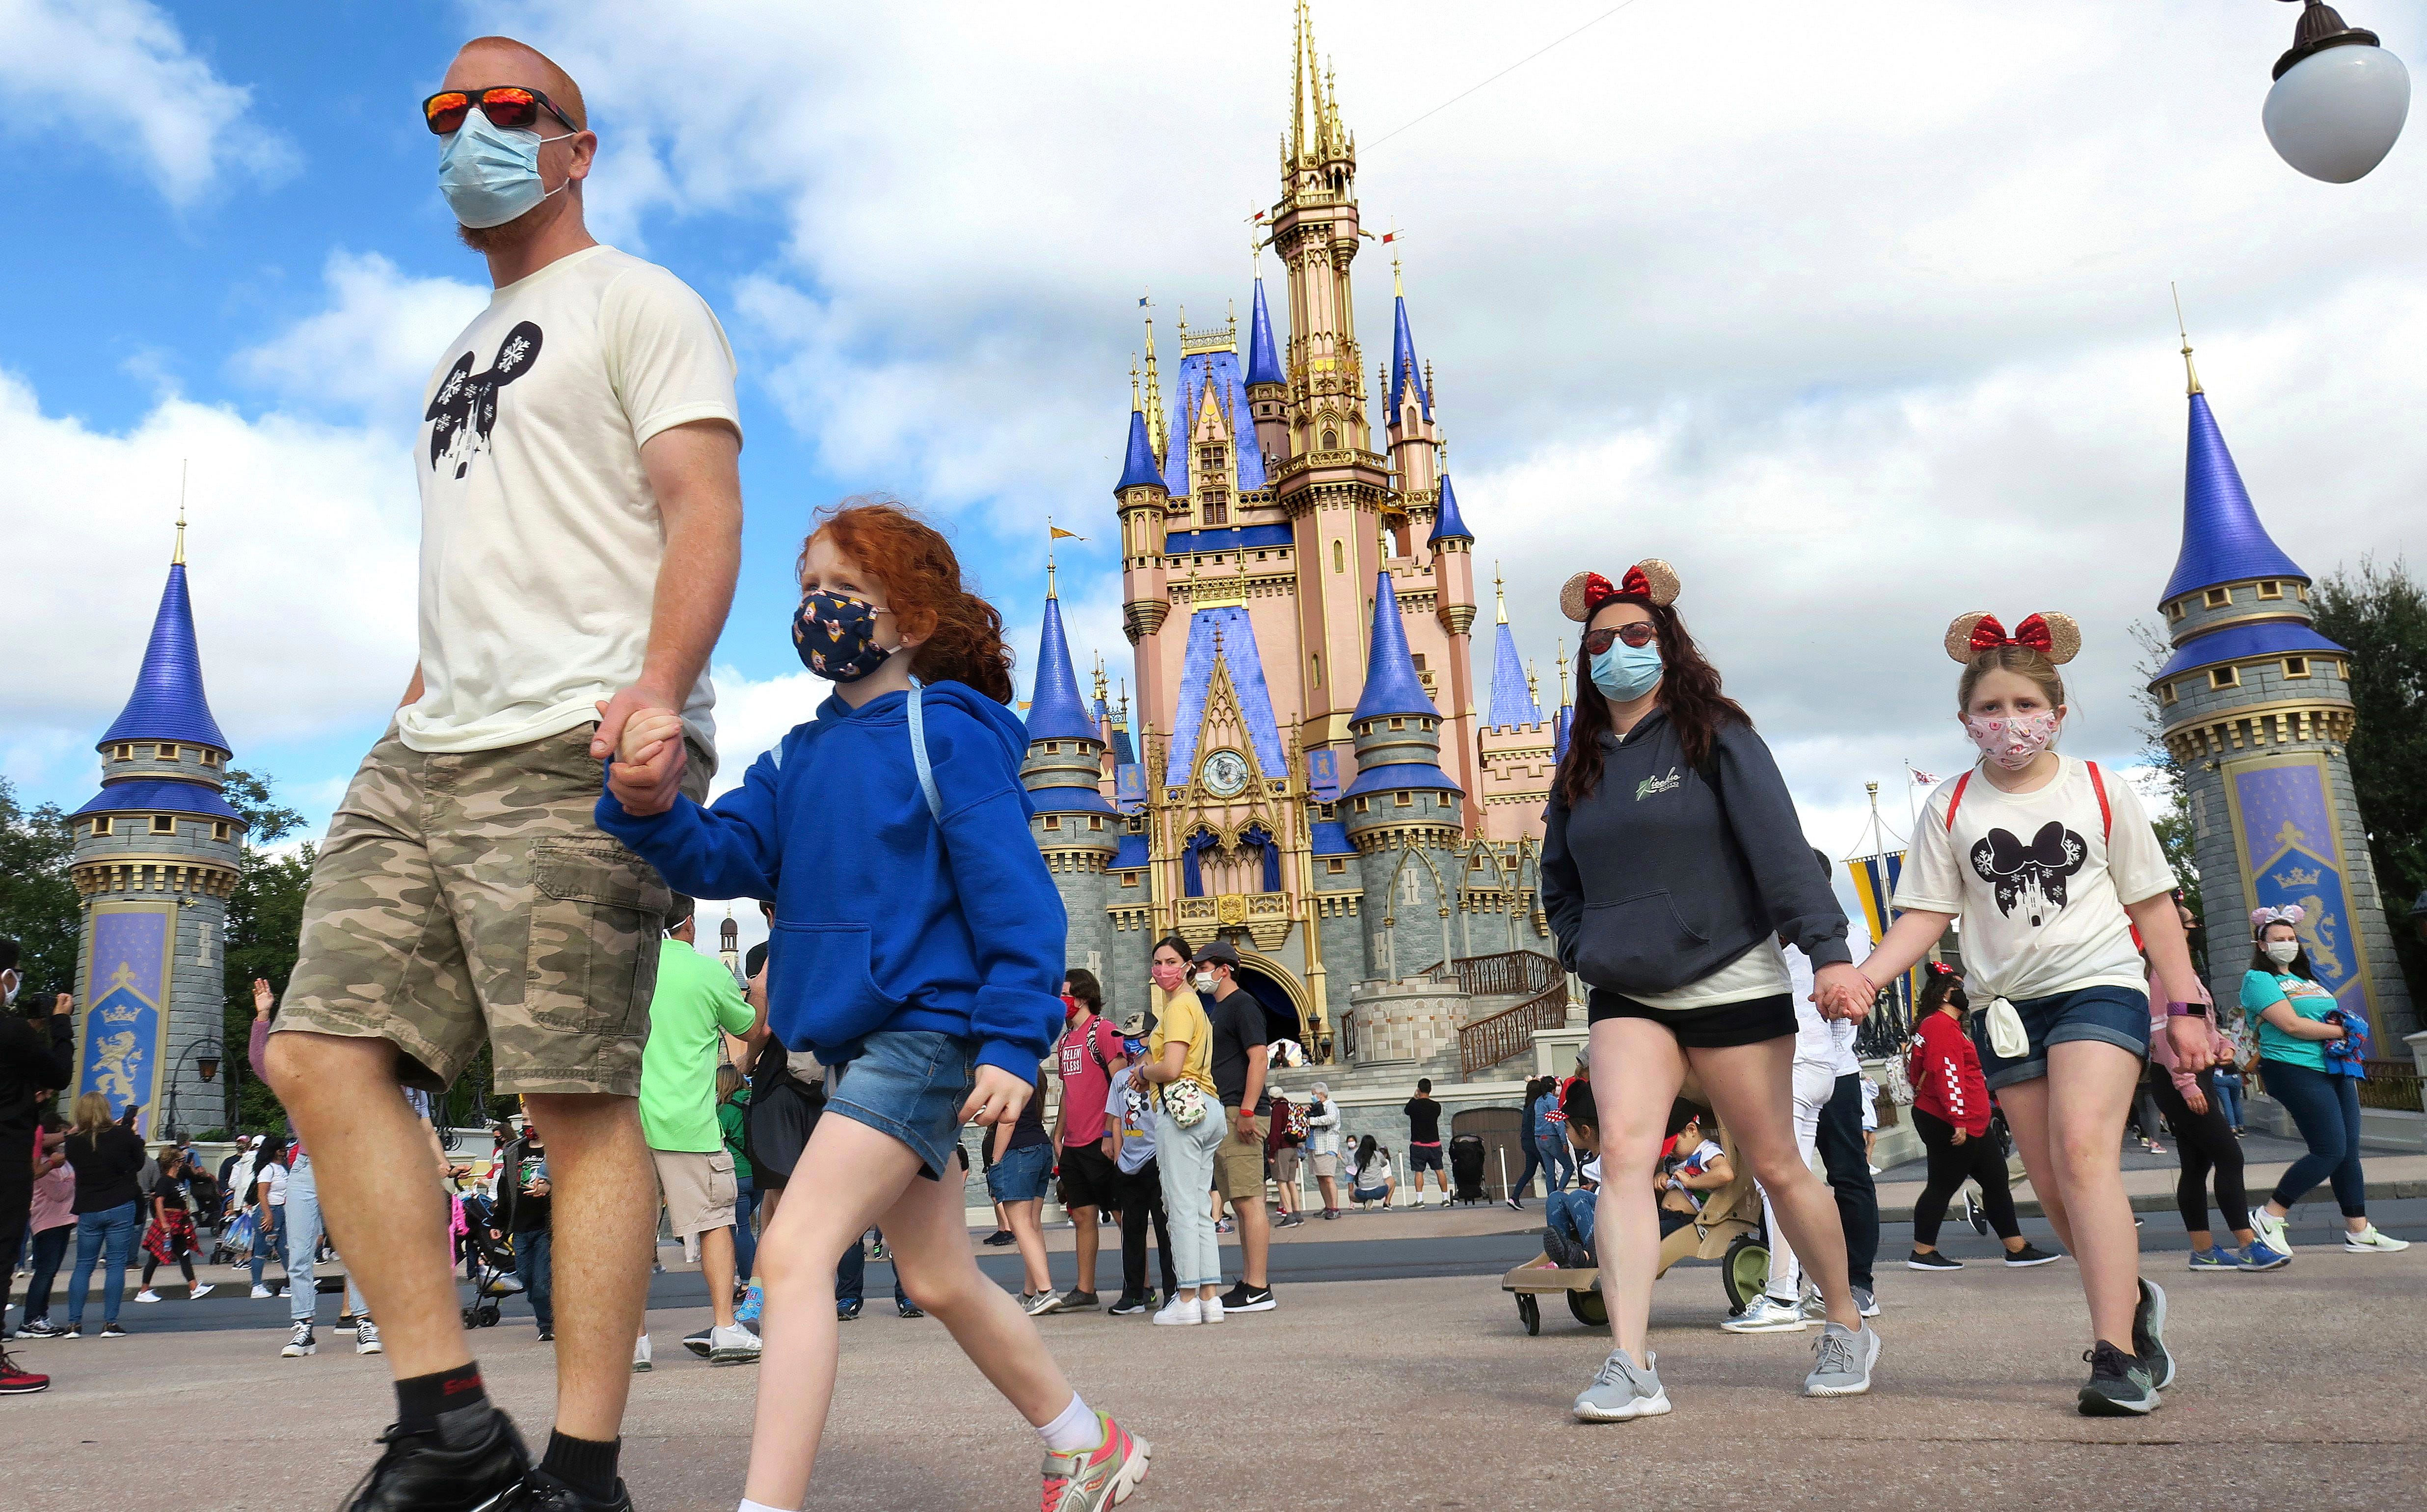 Walt Disney World relaxes COVID mask restrictions for outdoor photo